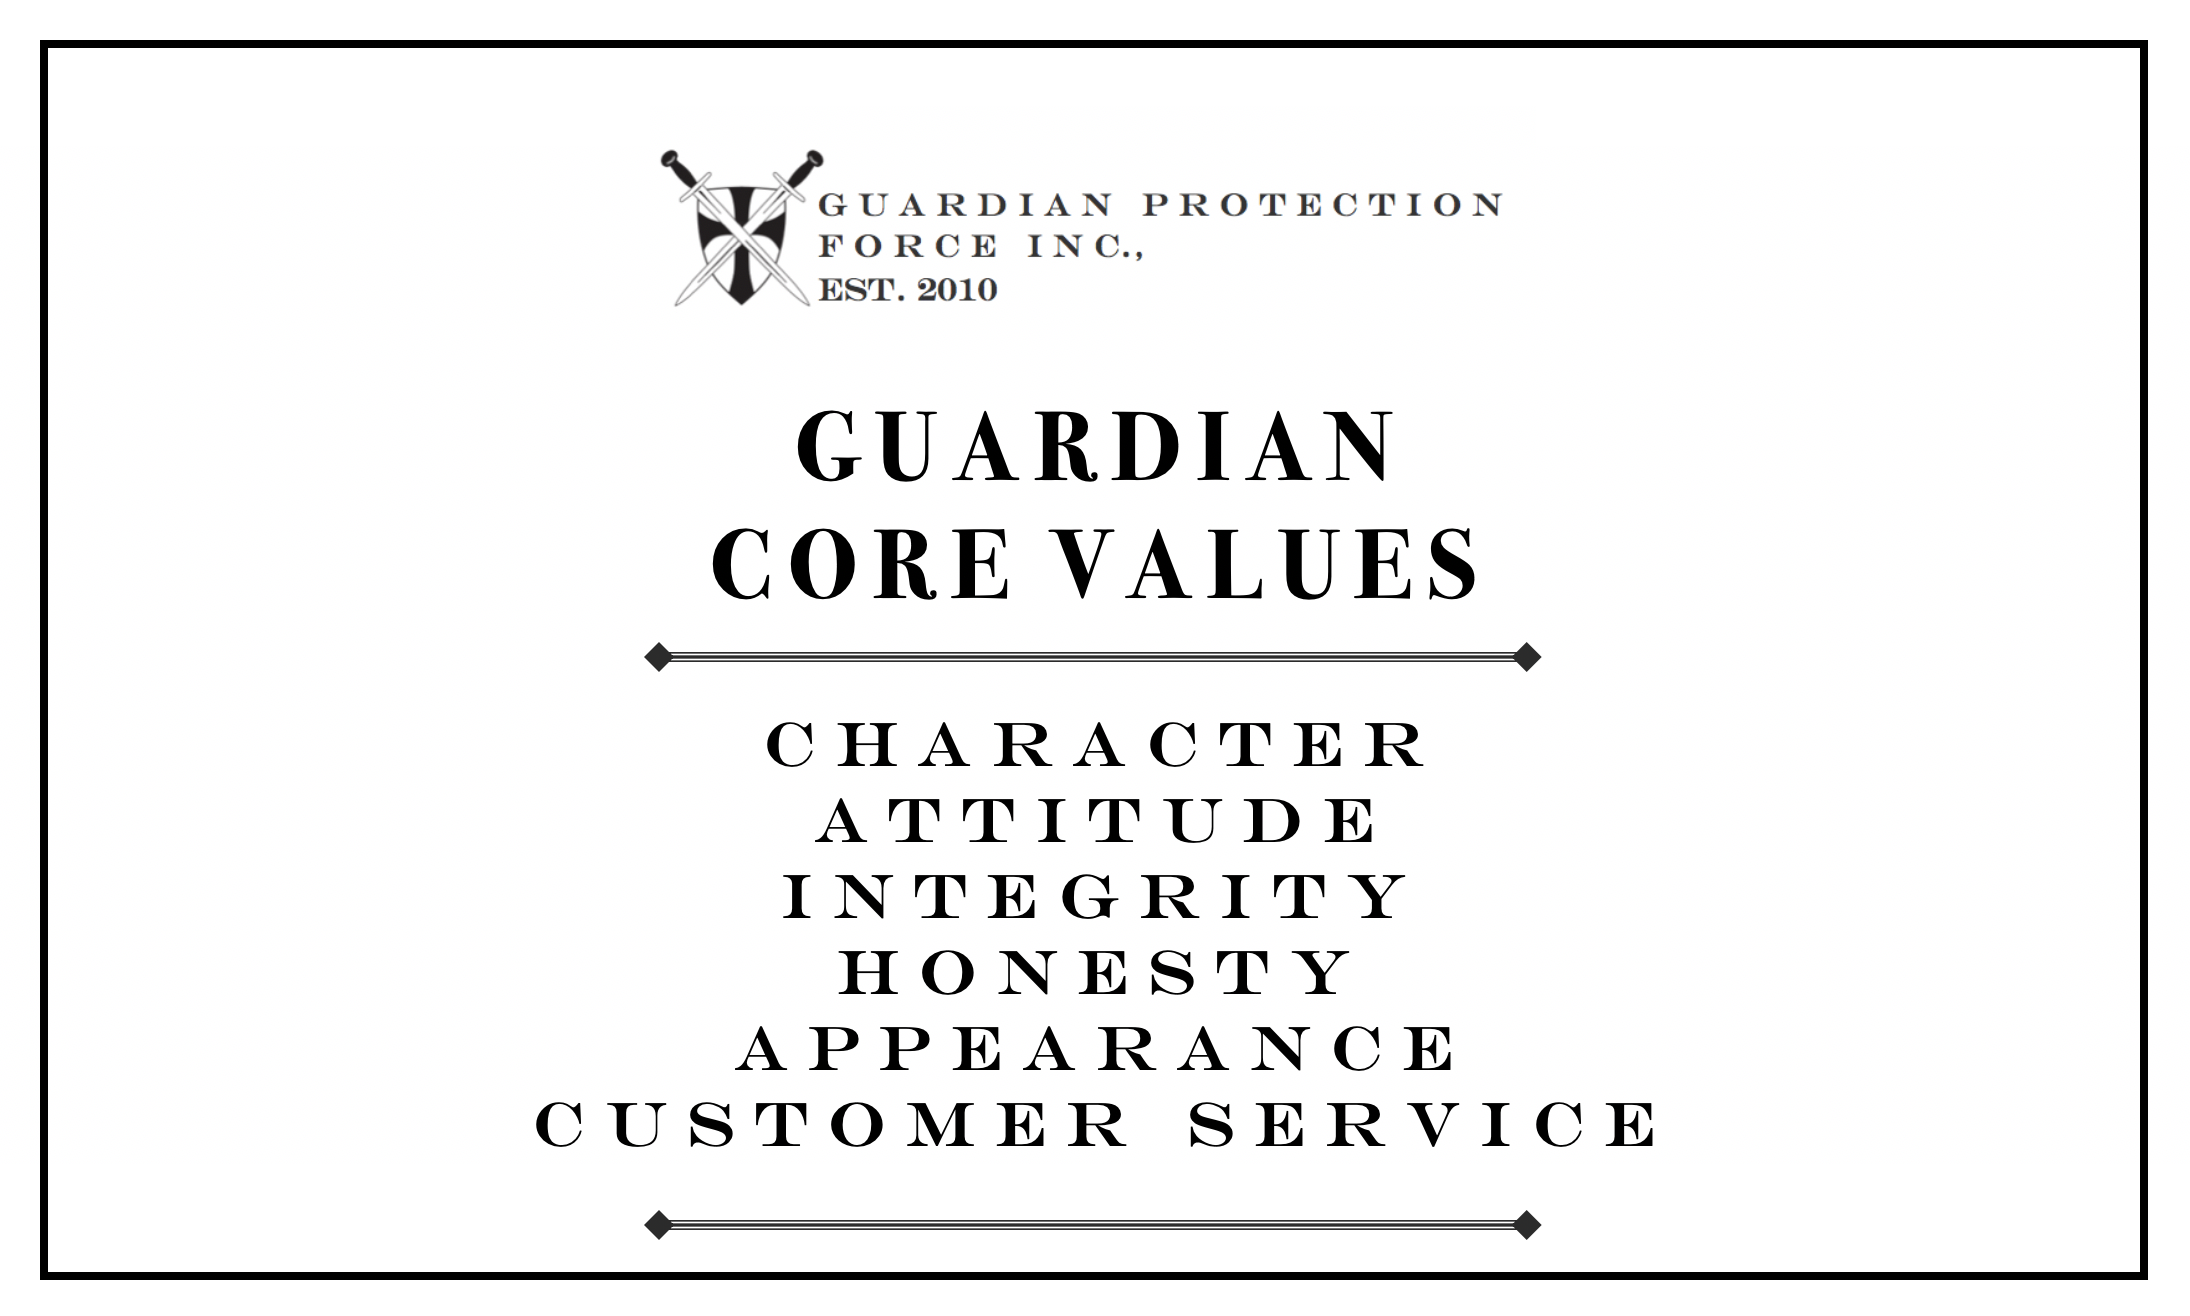 GPF Core Values: Character, Attitude, Integrity, Honesty, Appearance and Customer Service 